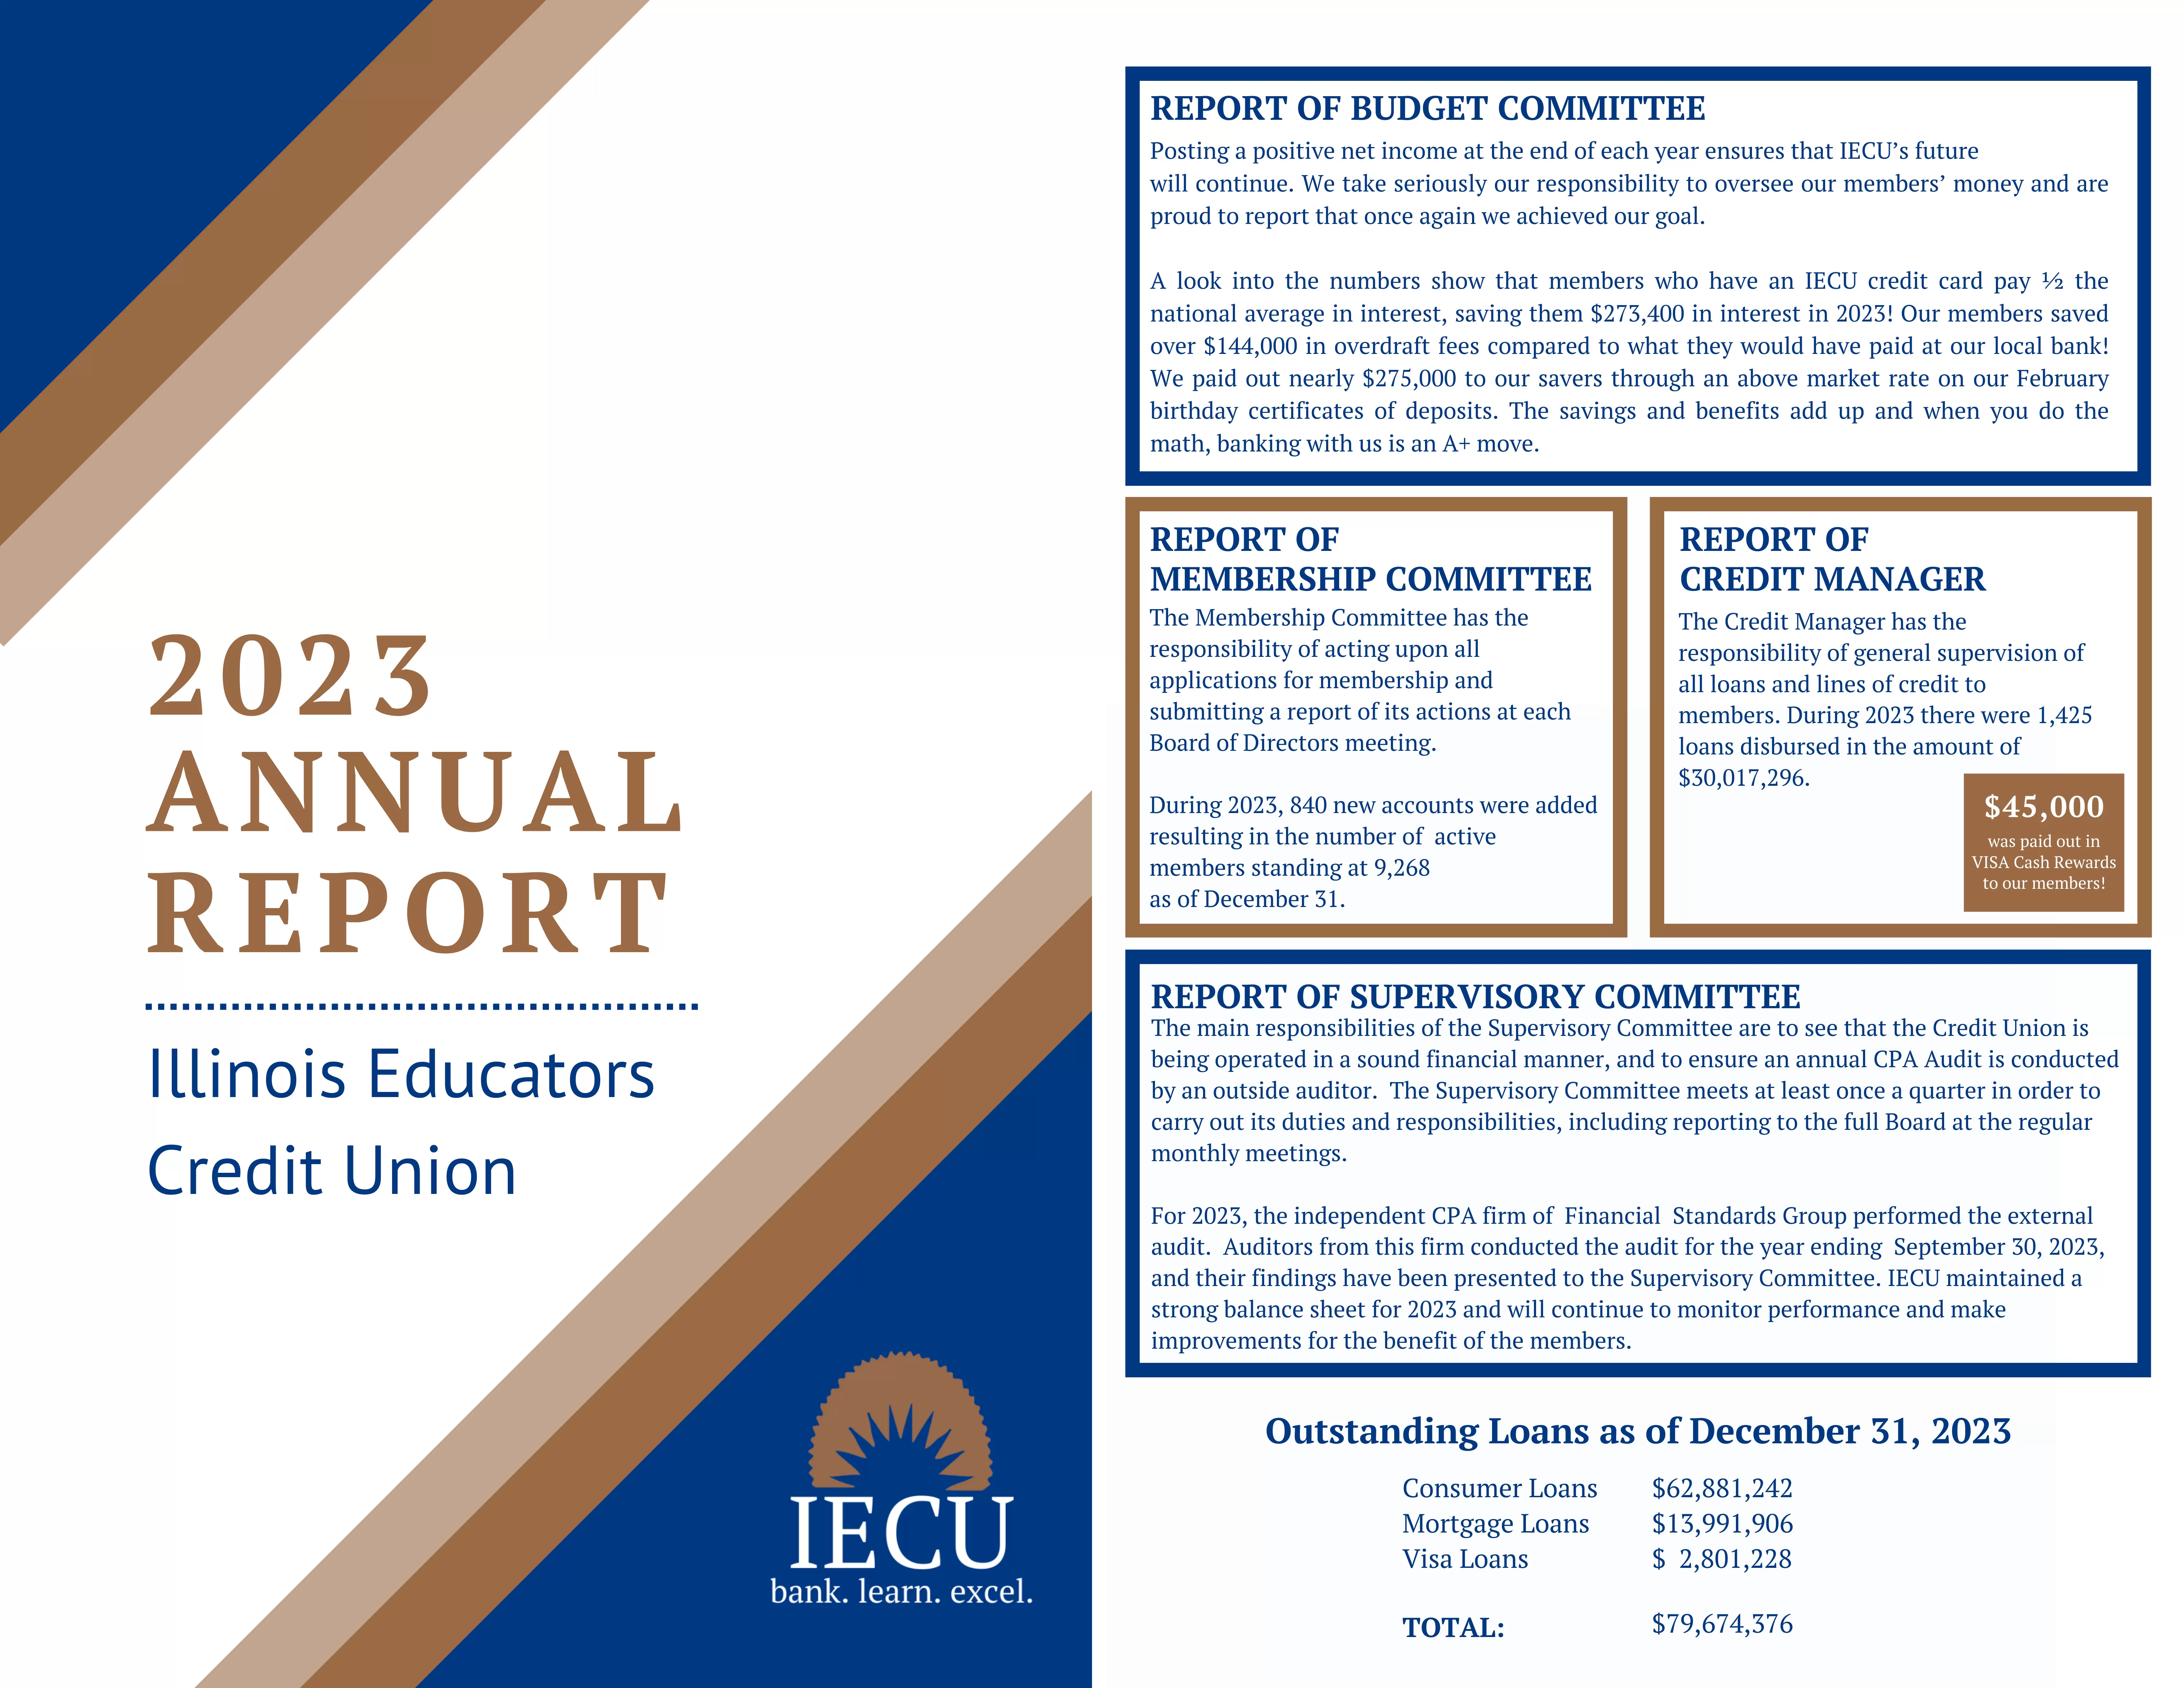 Front Cover of the 2023 Annual Report.